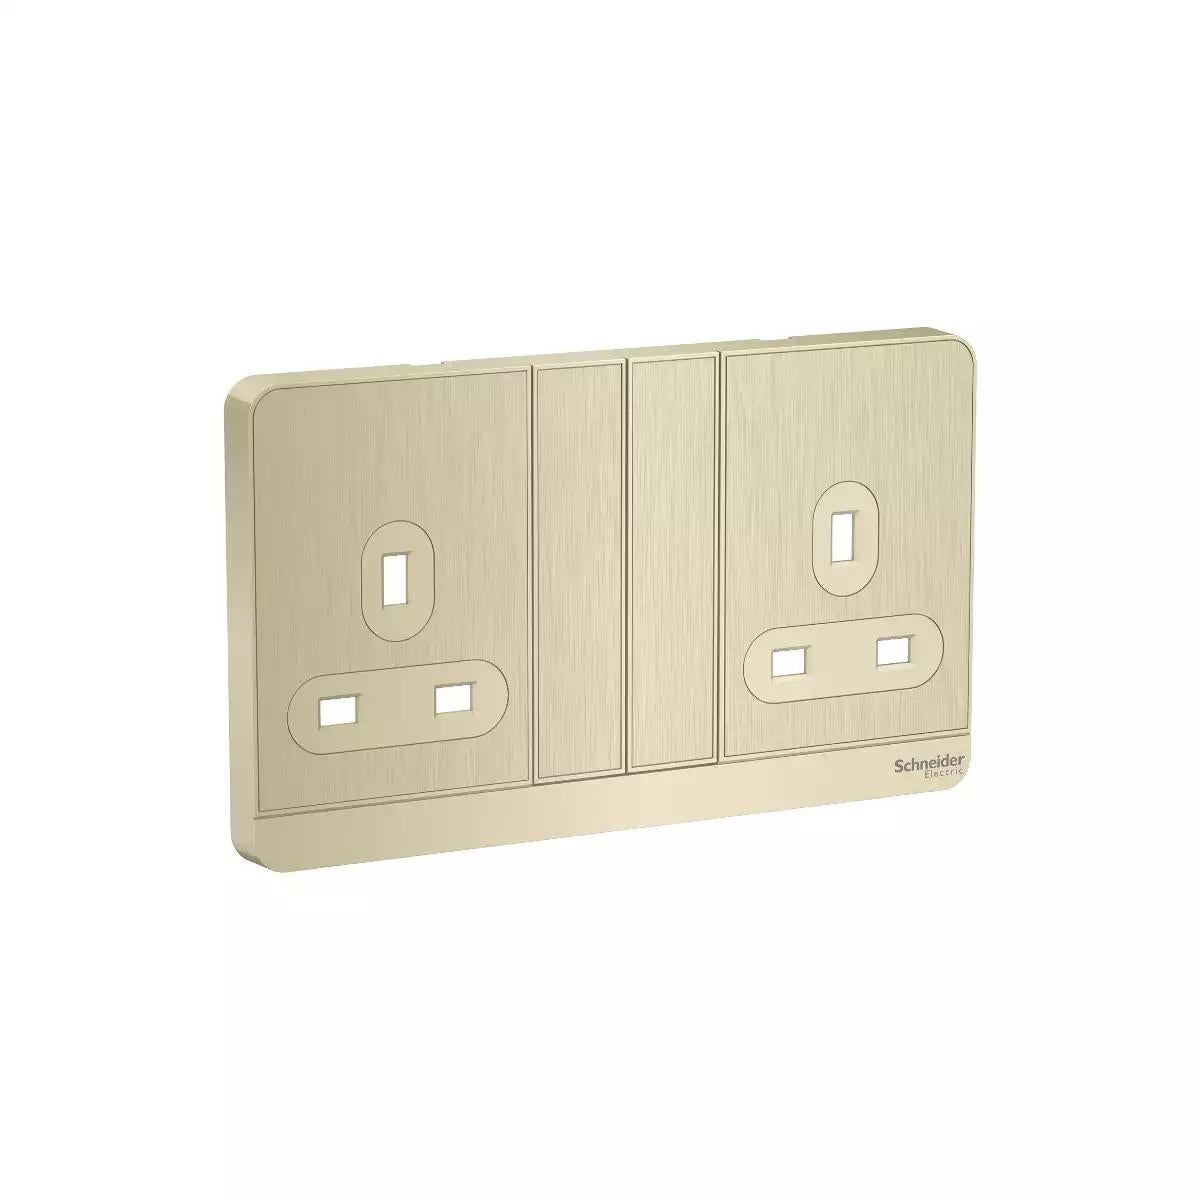 AvatarOn, 2 switched socket, 3P, 13 A, 250 V, Metal Gold Hairline